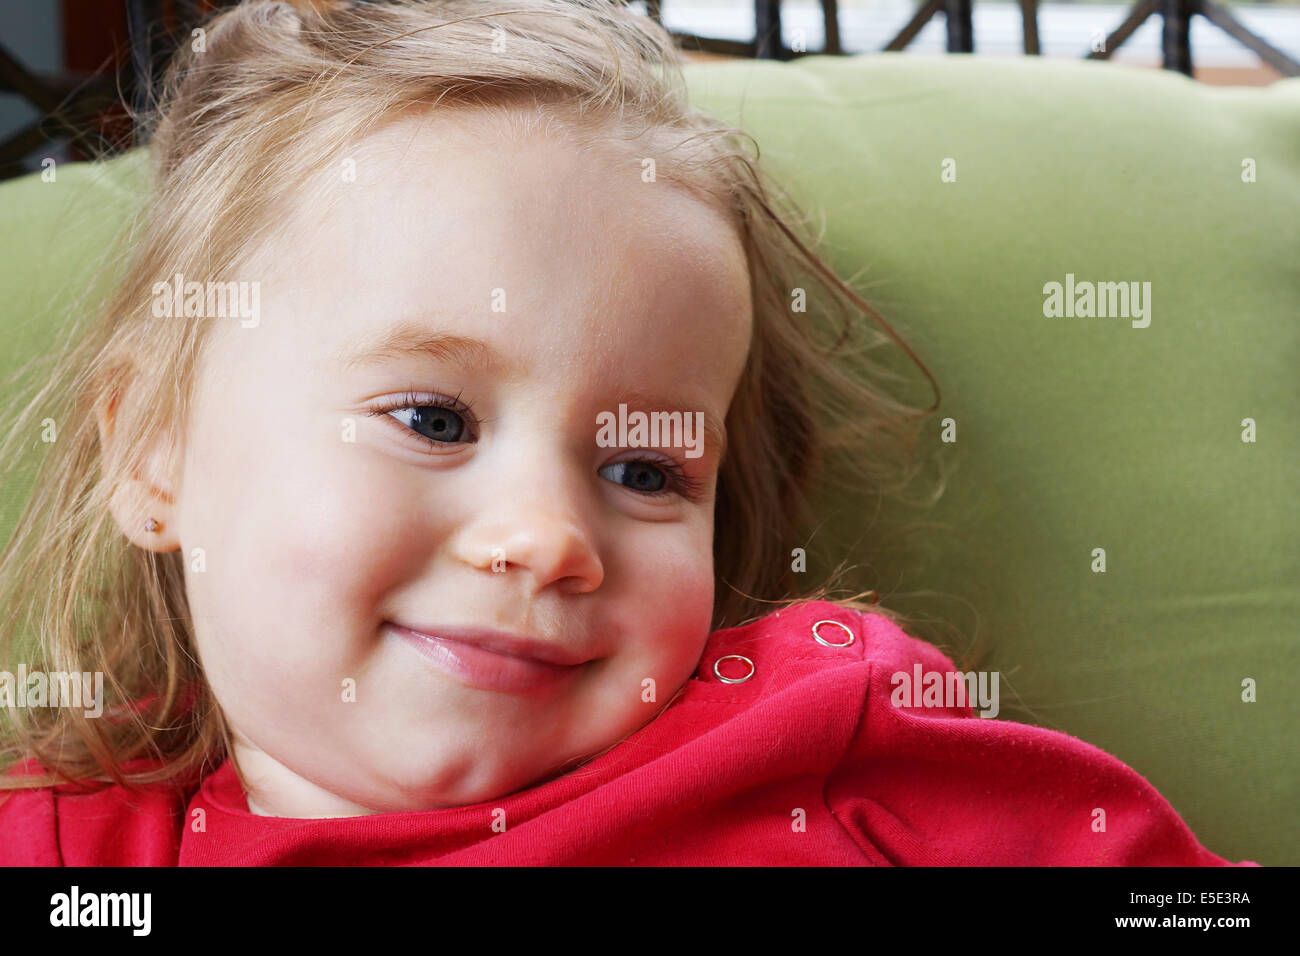 Portrait of a cute blond baby girl smiling, looking away. Stock Photo